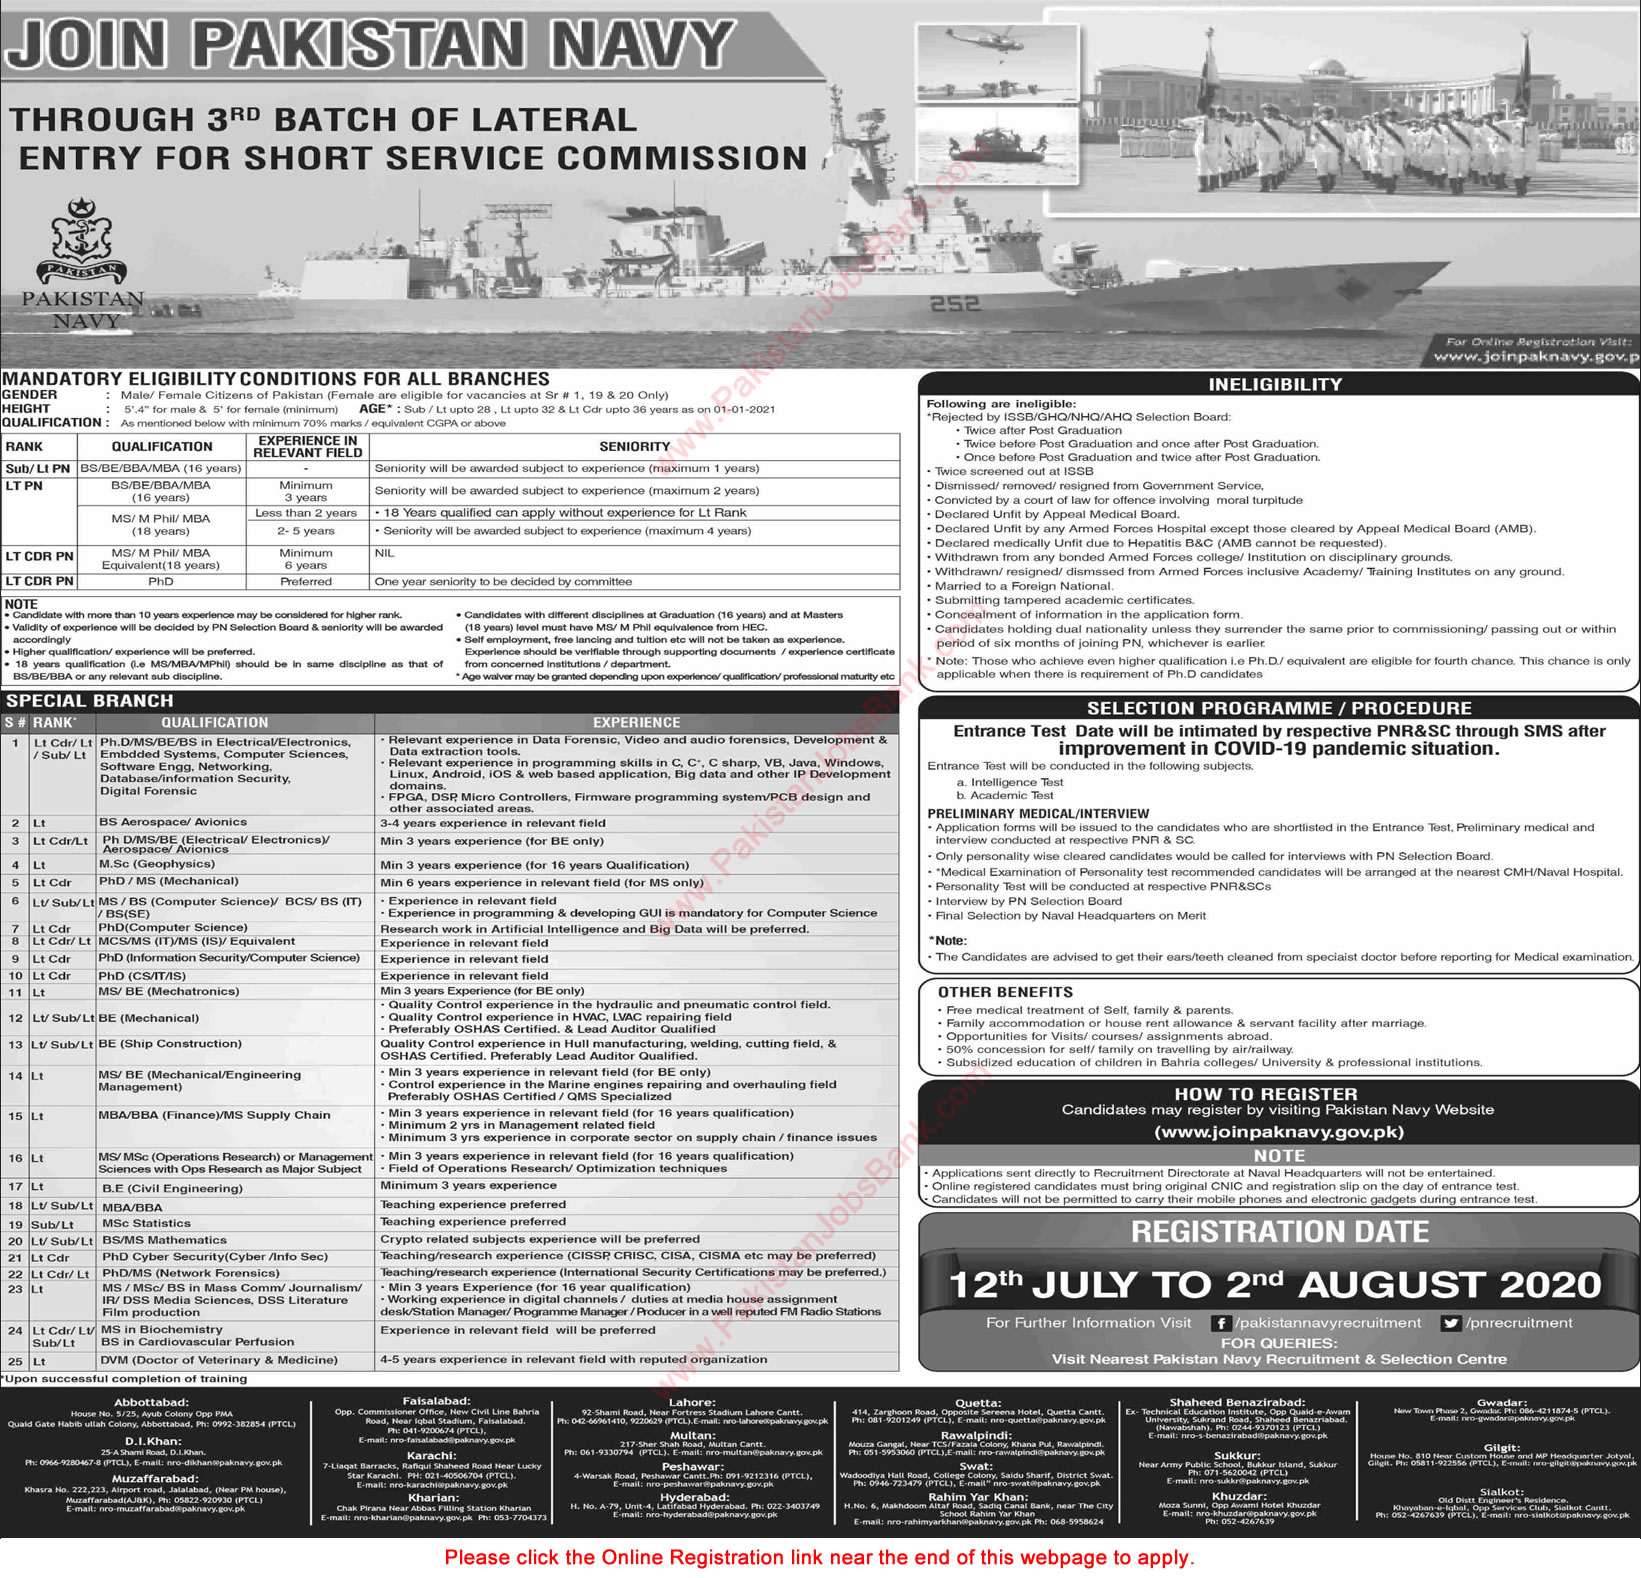 Join Pakistan Navy through Short Service Commission Course 2020 July Online Registration 3rd Batch of Lateral Entry Latest